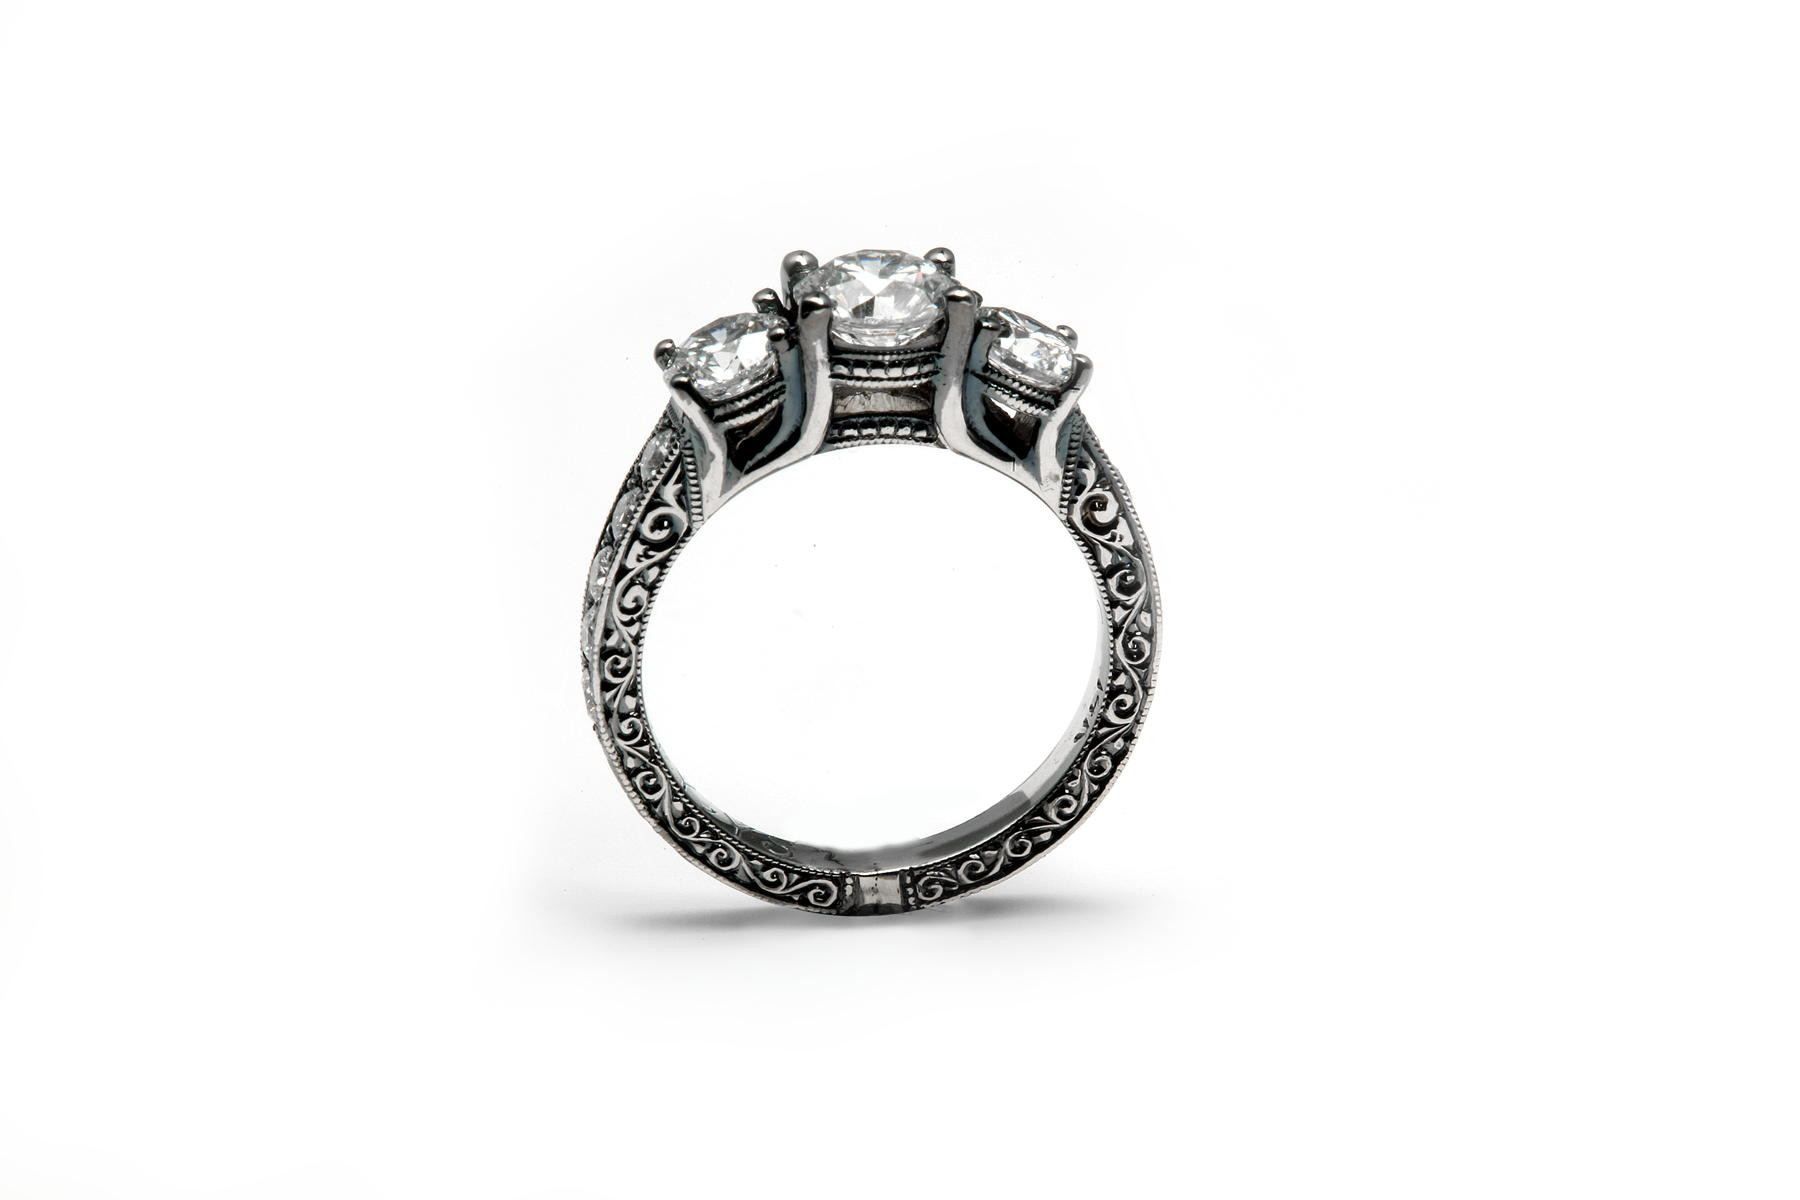 Black Diamond Engagement Rings Meaning
 How Google Can Help You Design Your Wedding Ring